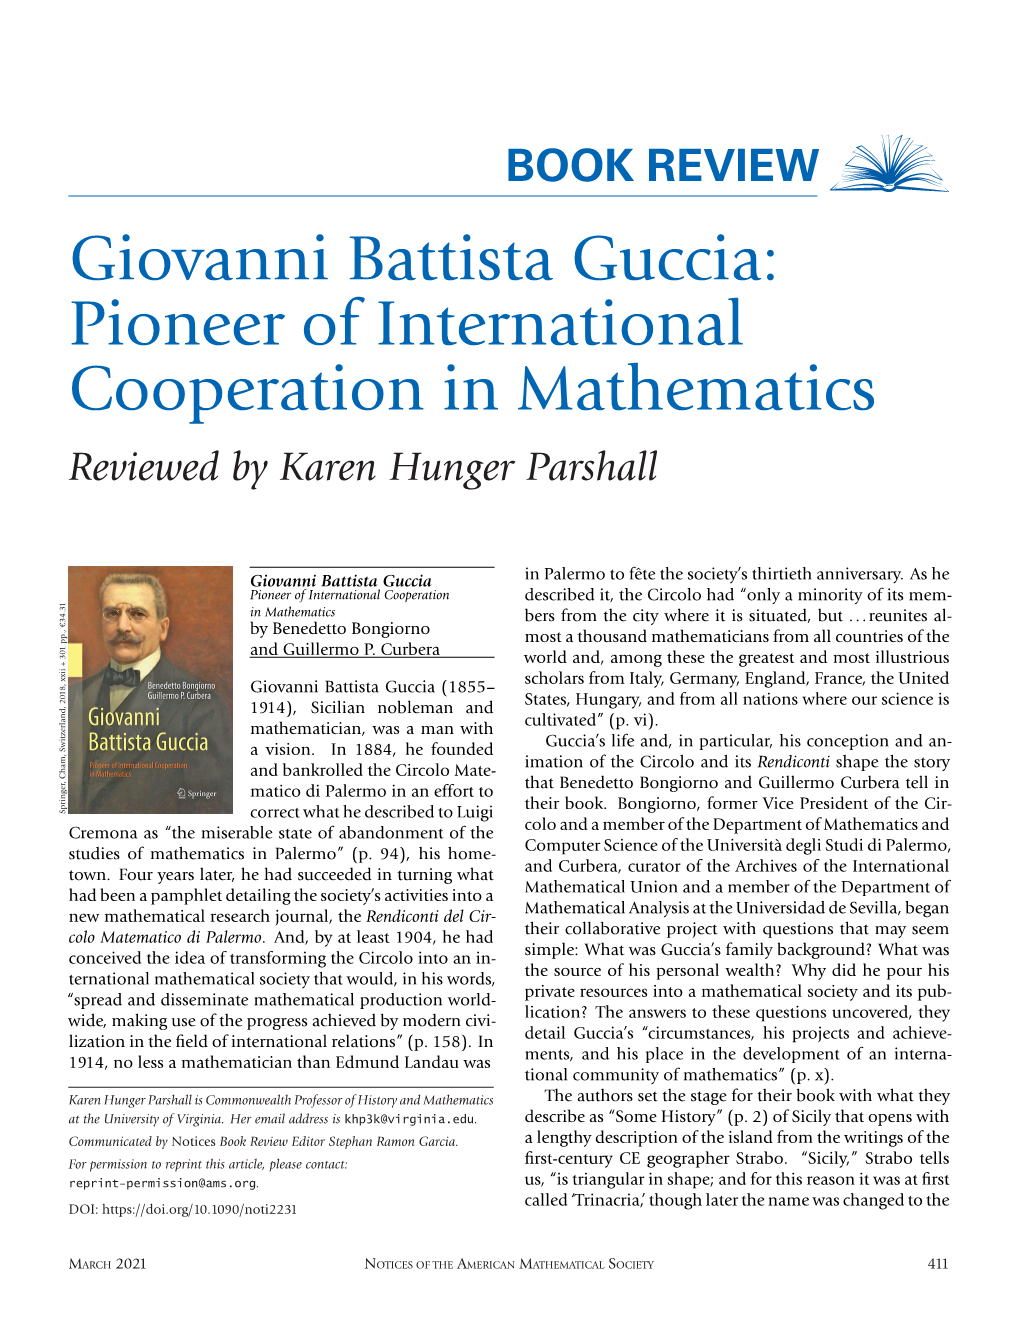 Giovanni Battista Guccia: Pioneer of International Cooperation in Mathematics Reviewed by Karen Hunger Parshall